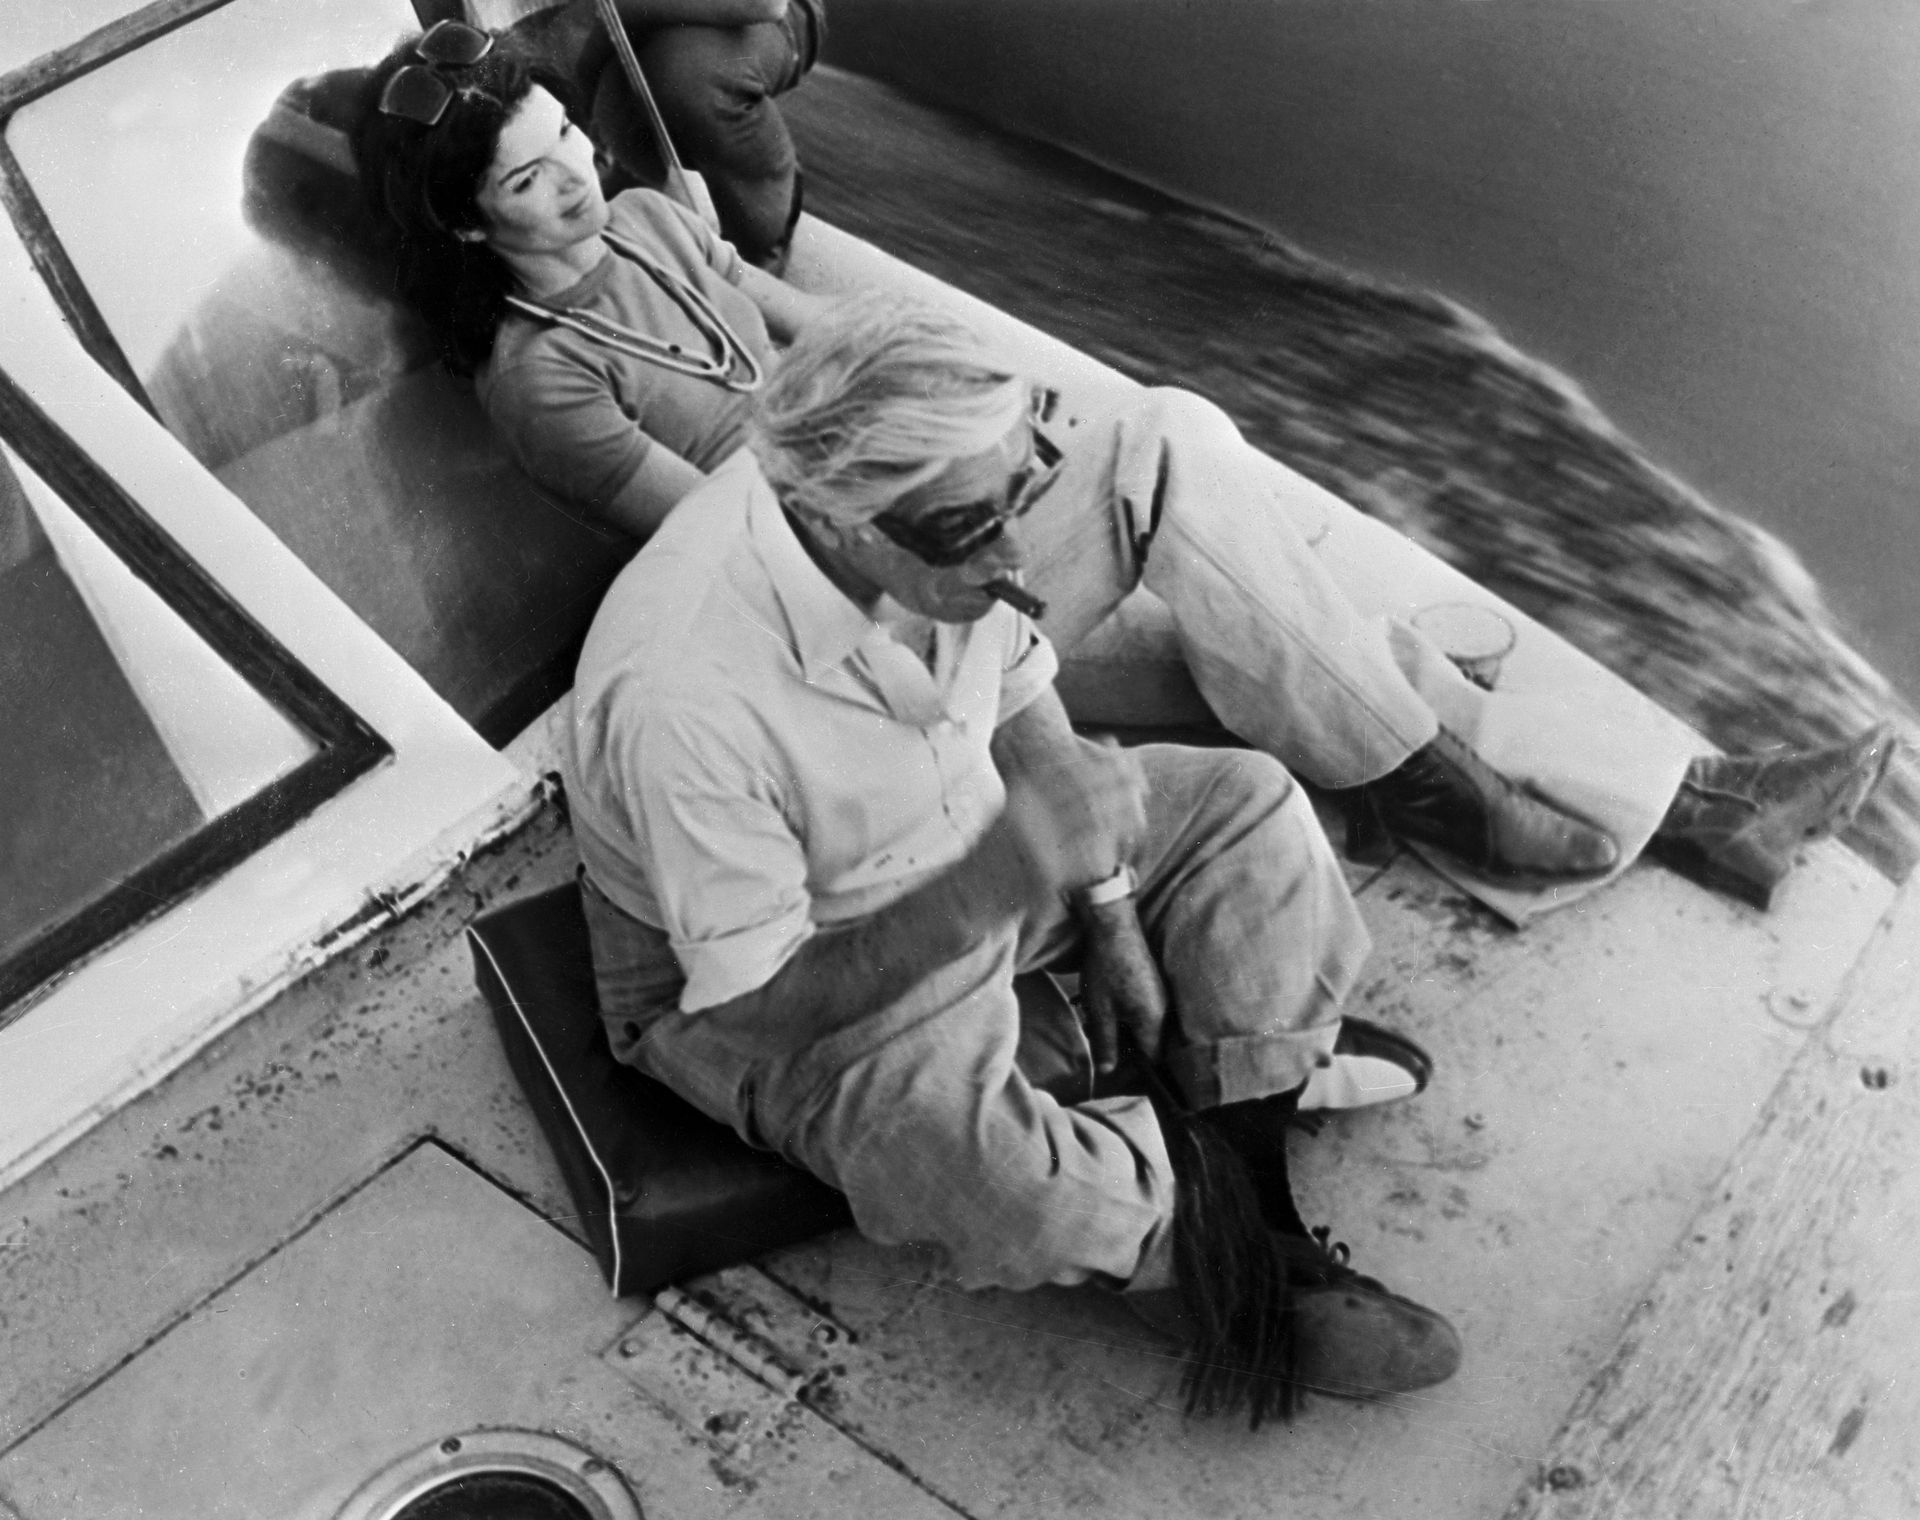 Aristotle Onassis and Jacqueline Onassis Riding in Boat